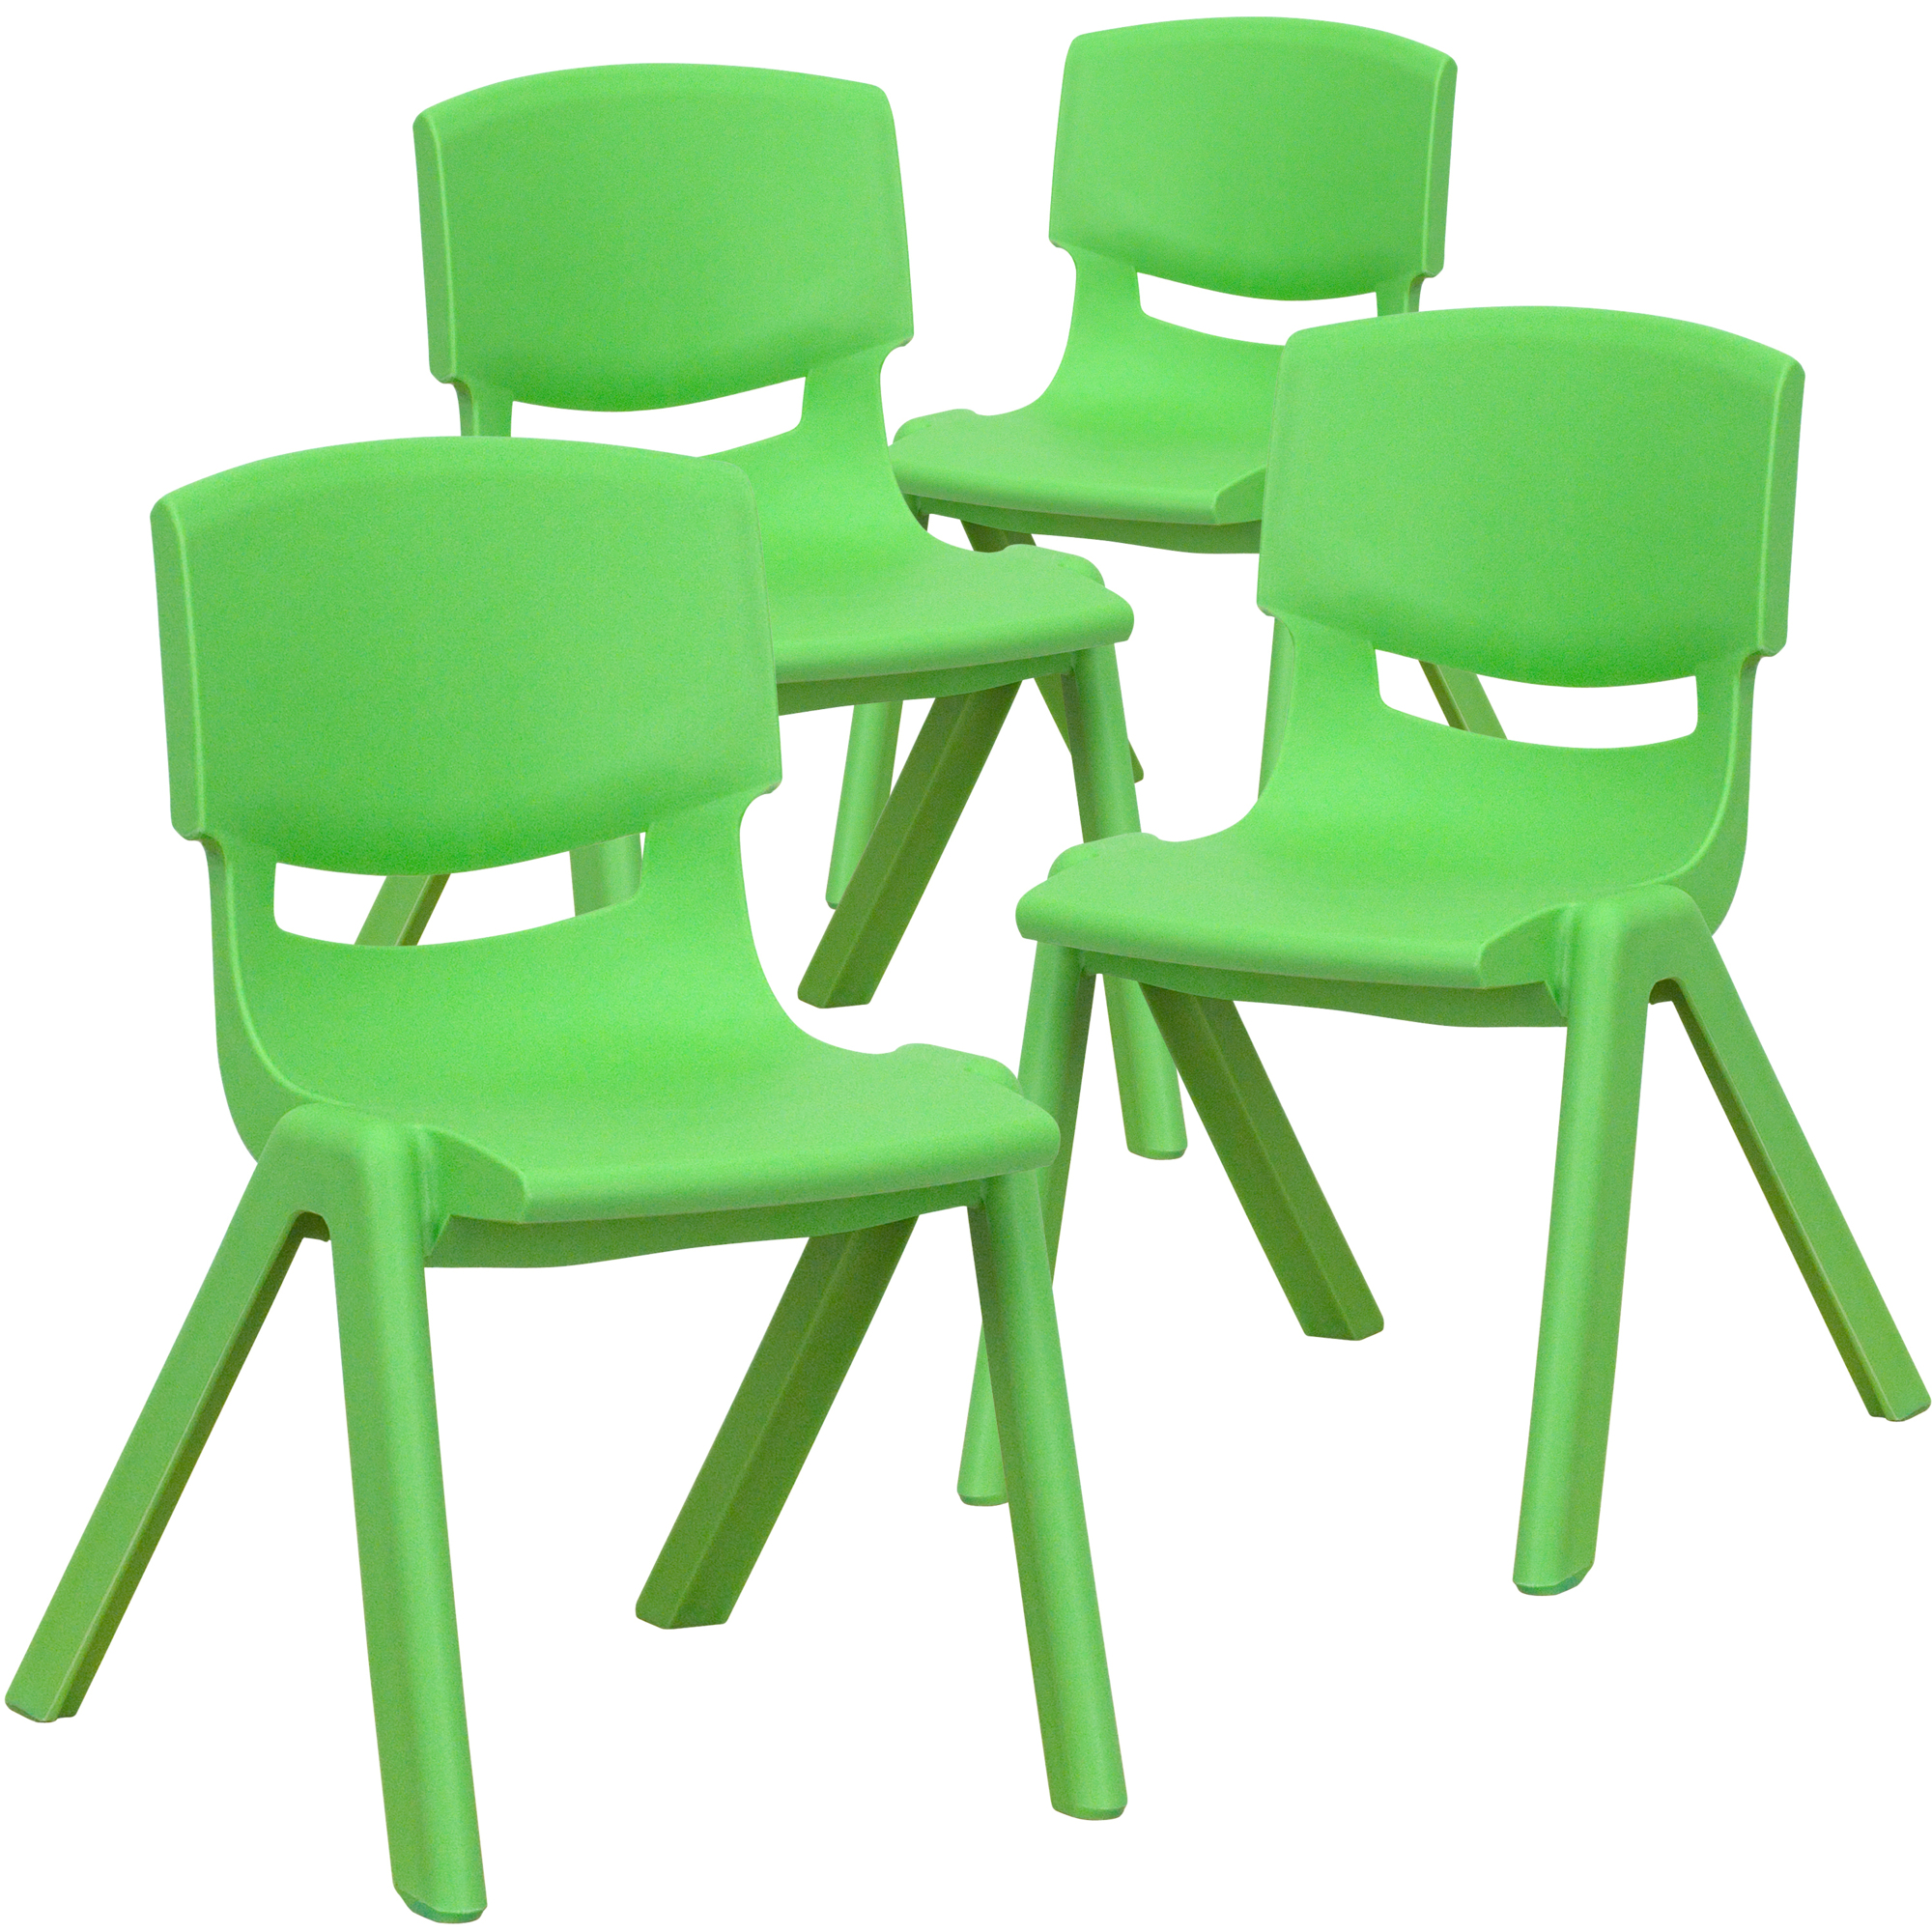 Flash Furniture, 4 Pack Green Plastic School Chair-12Inch H Seat, Primary Color Green, Included (qty.) 4, Model 4YUYCX4001GREEN